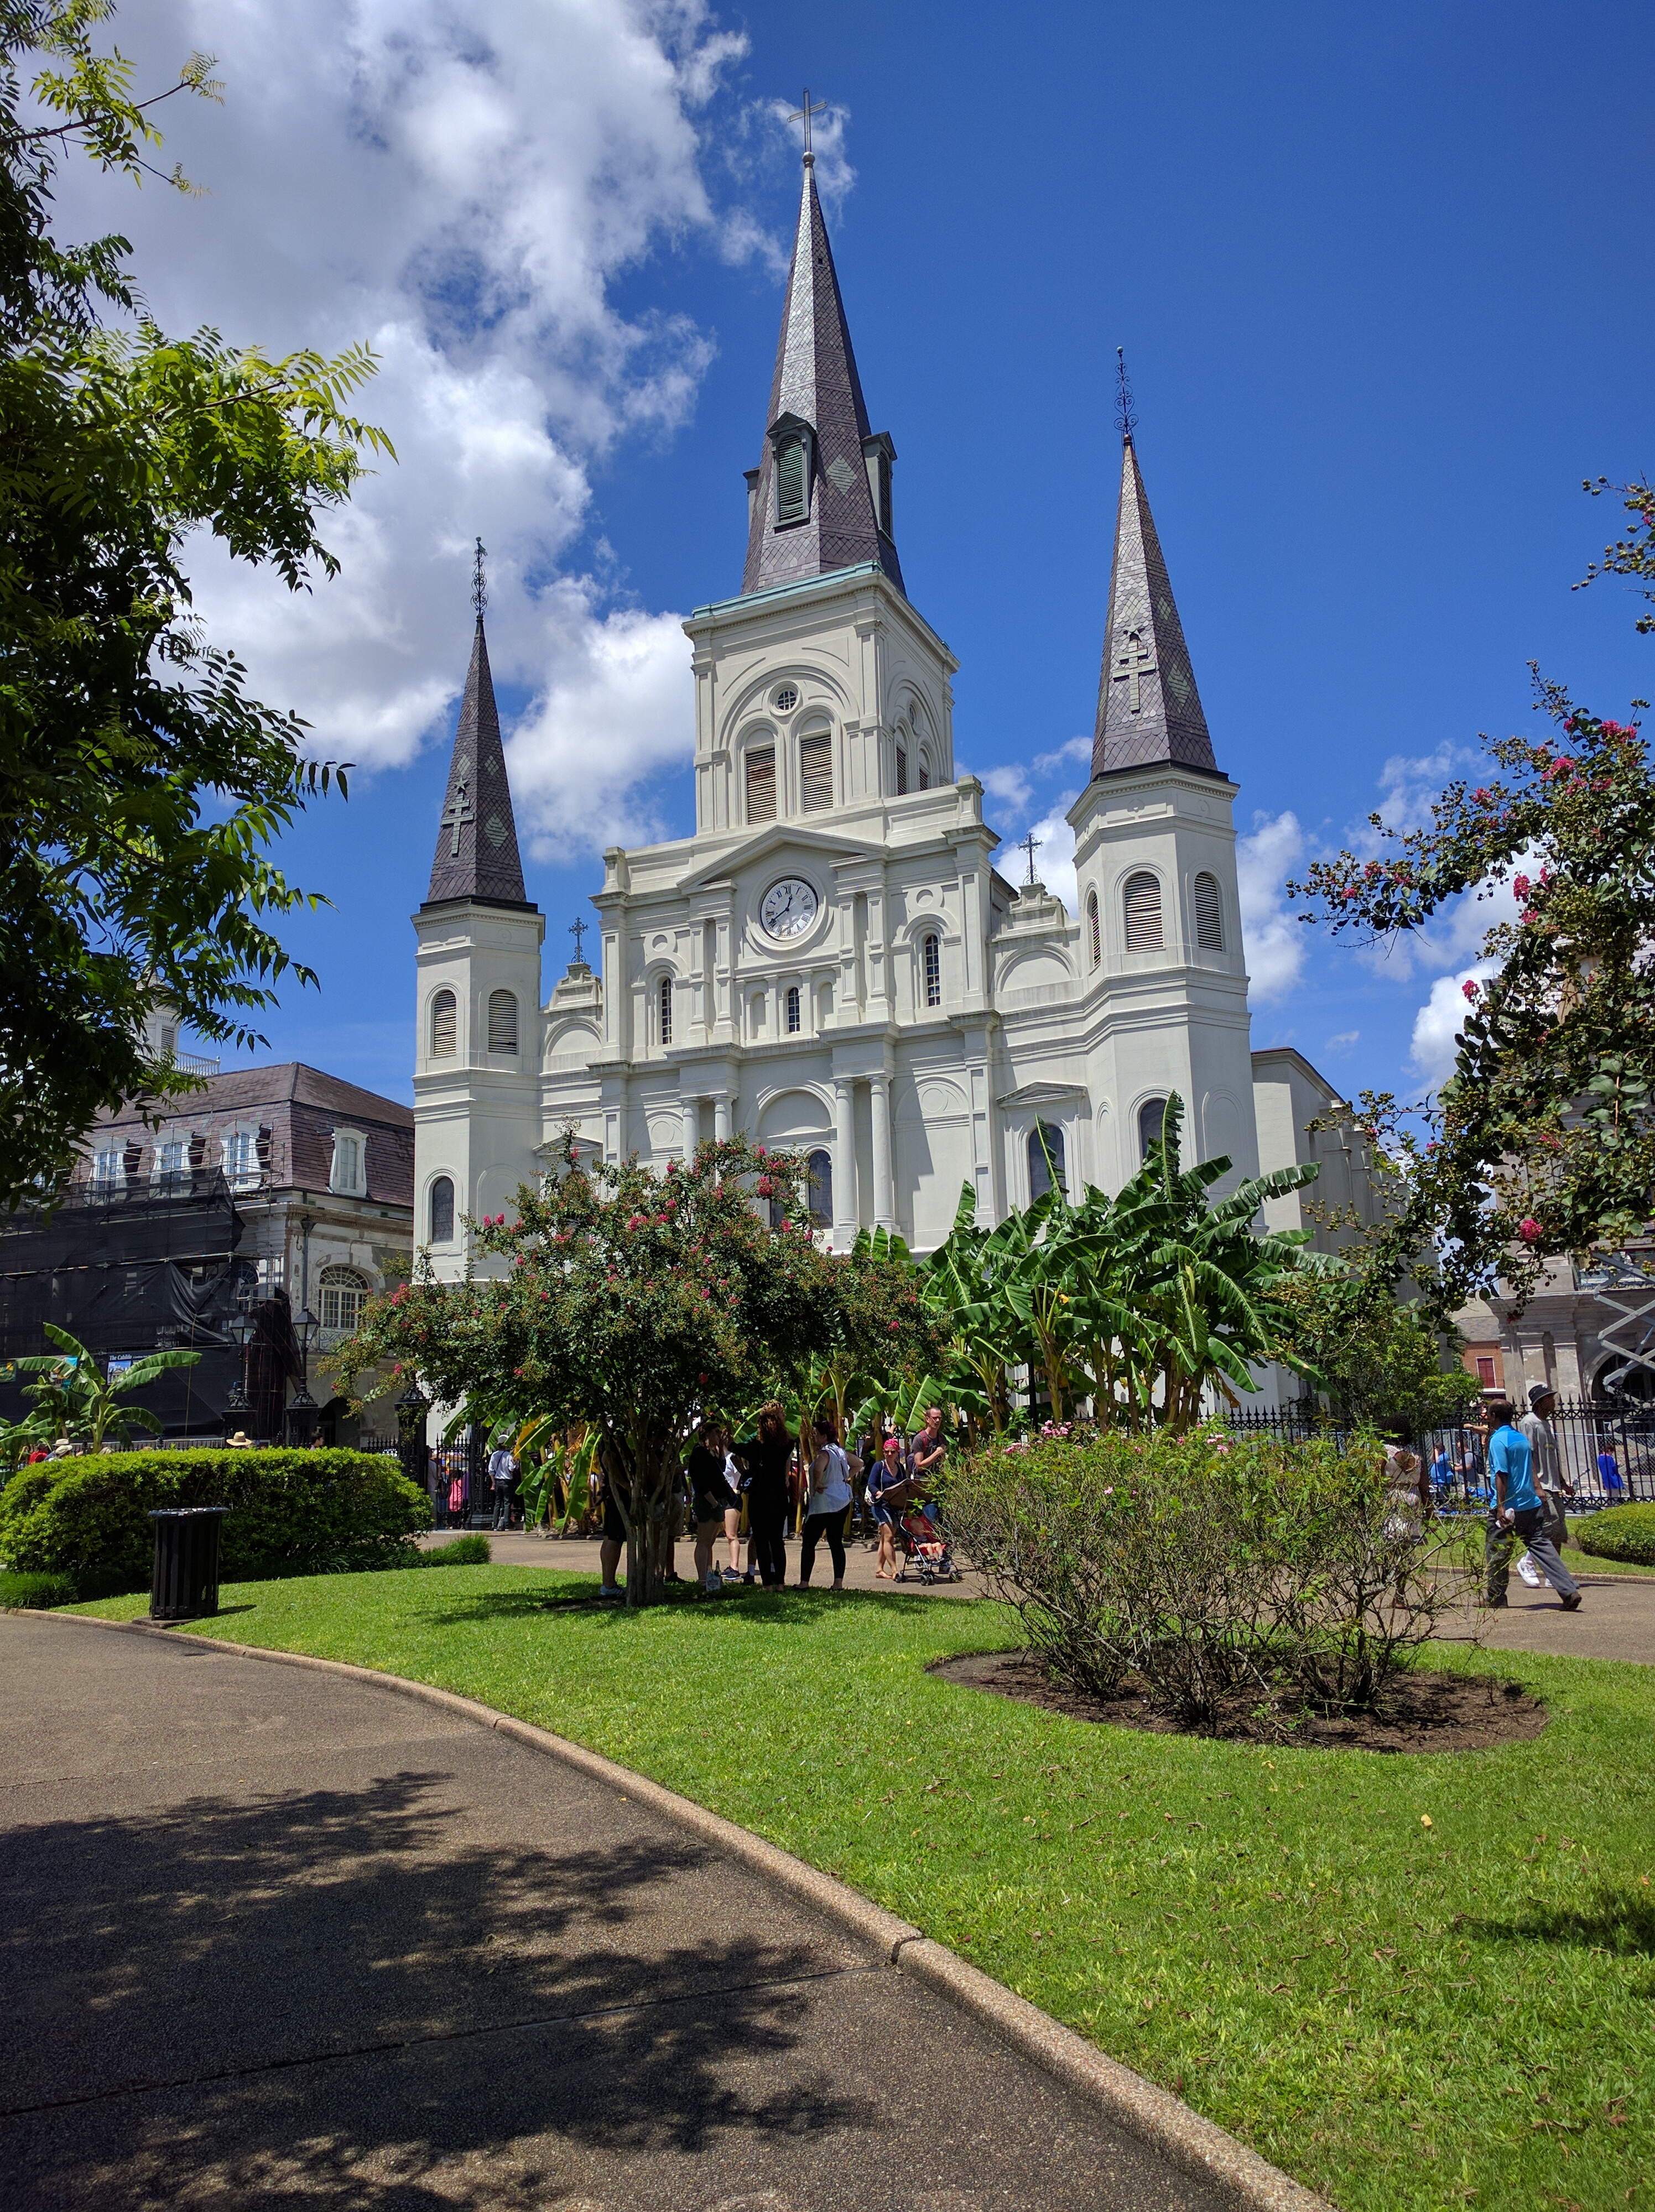 St. Louis Church right in the heart of the French Quarter